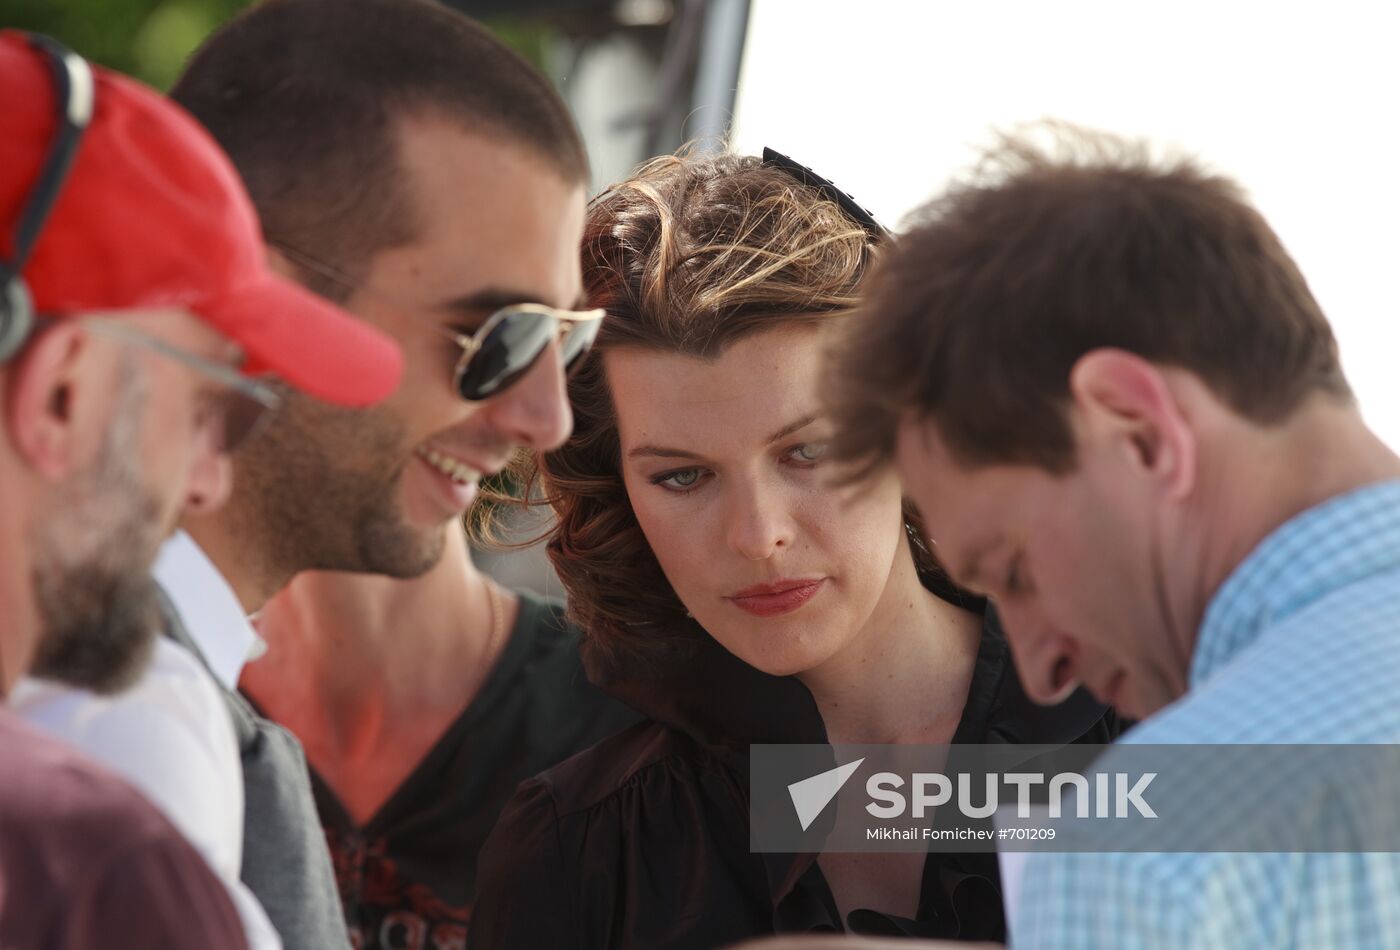 Filming movie Whims starring Milla Jovovich